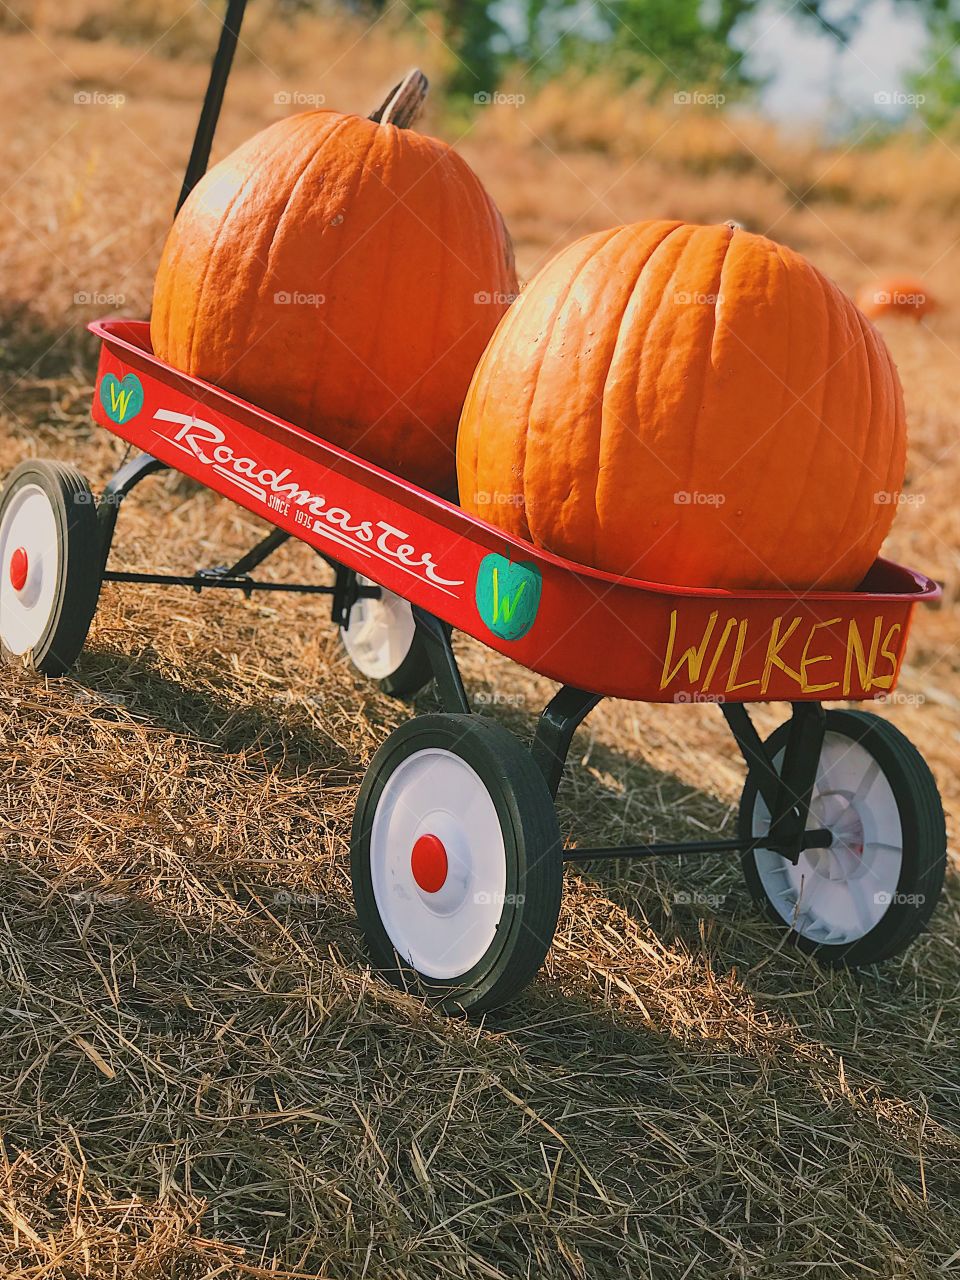 Two pumpkins in a red wagon